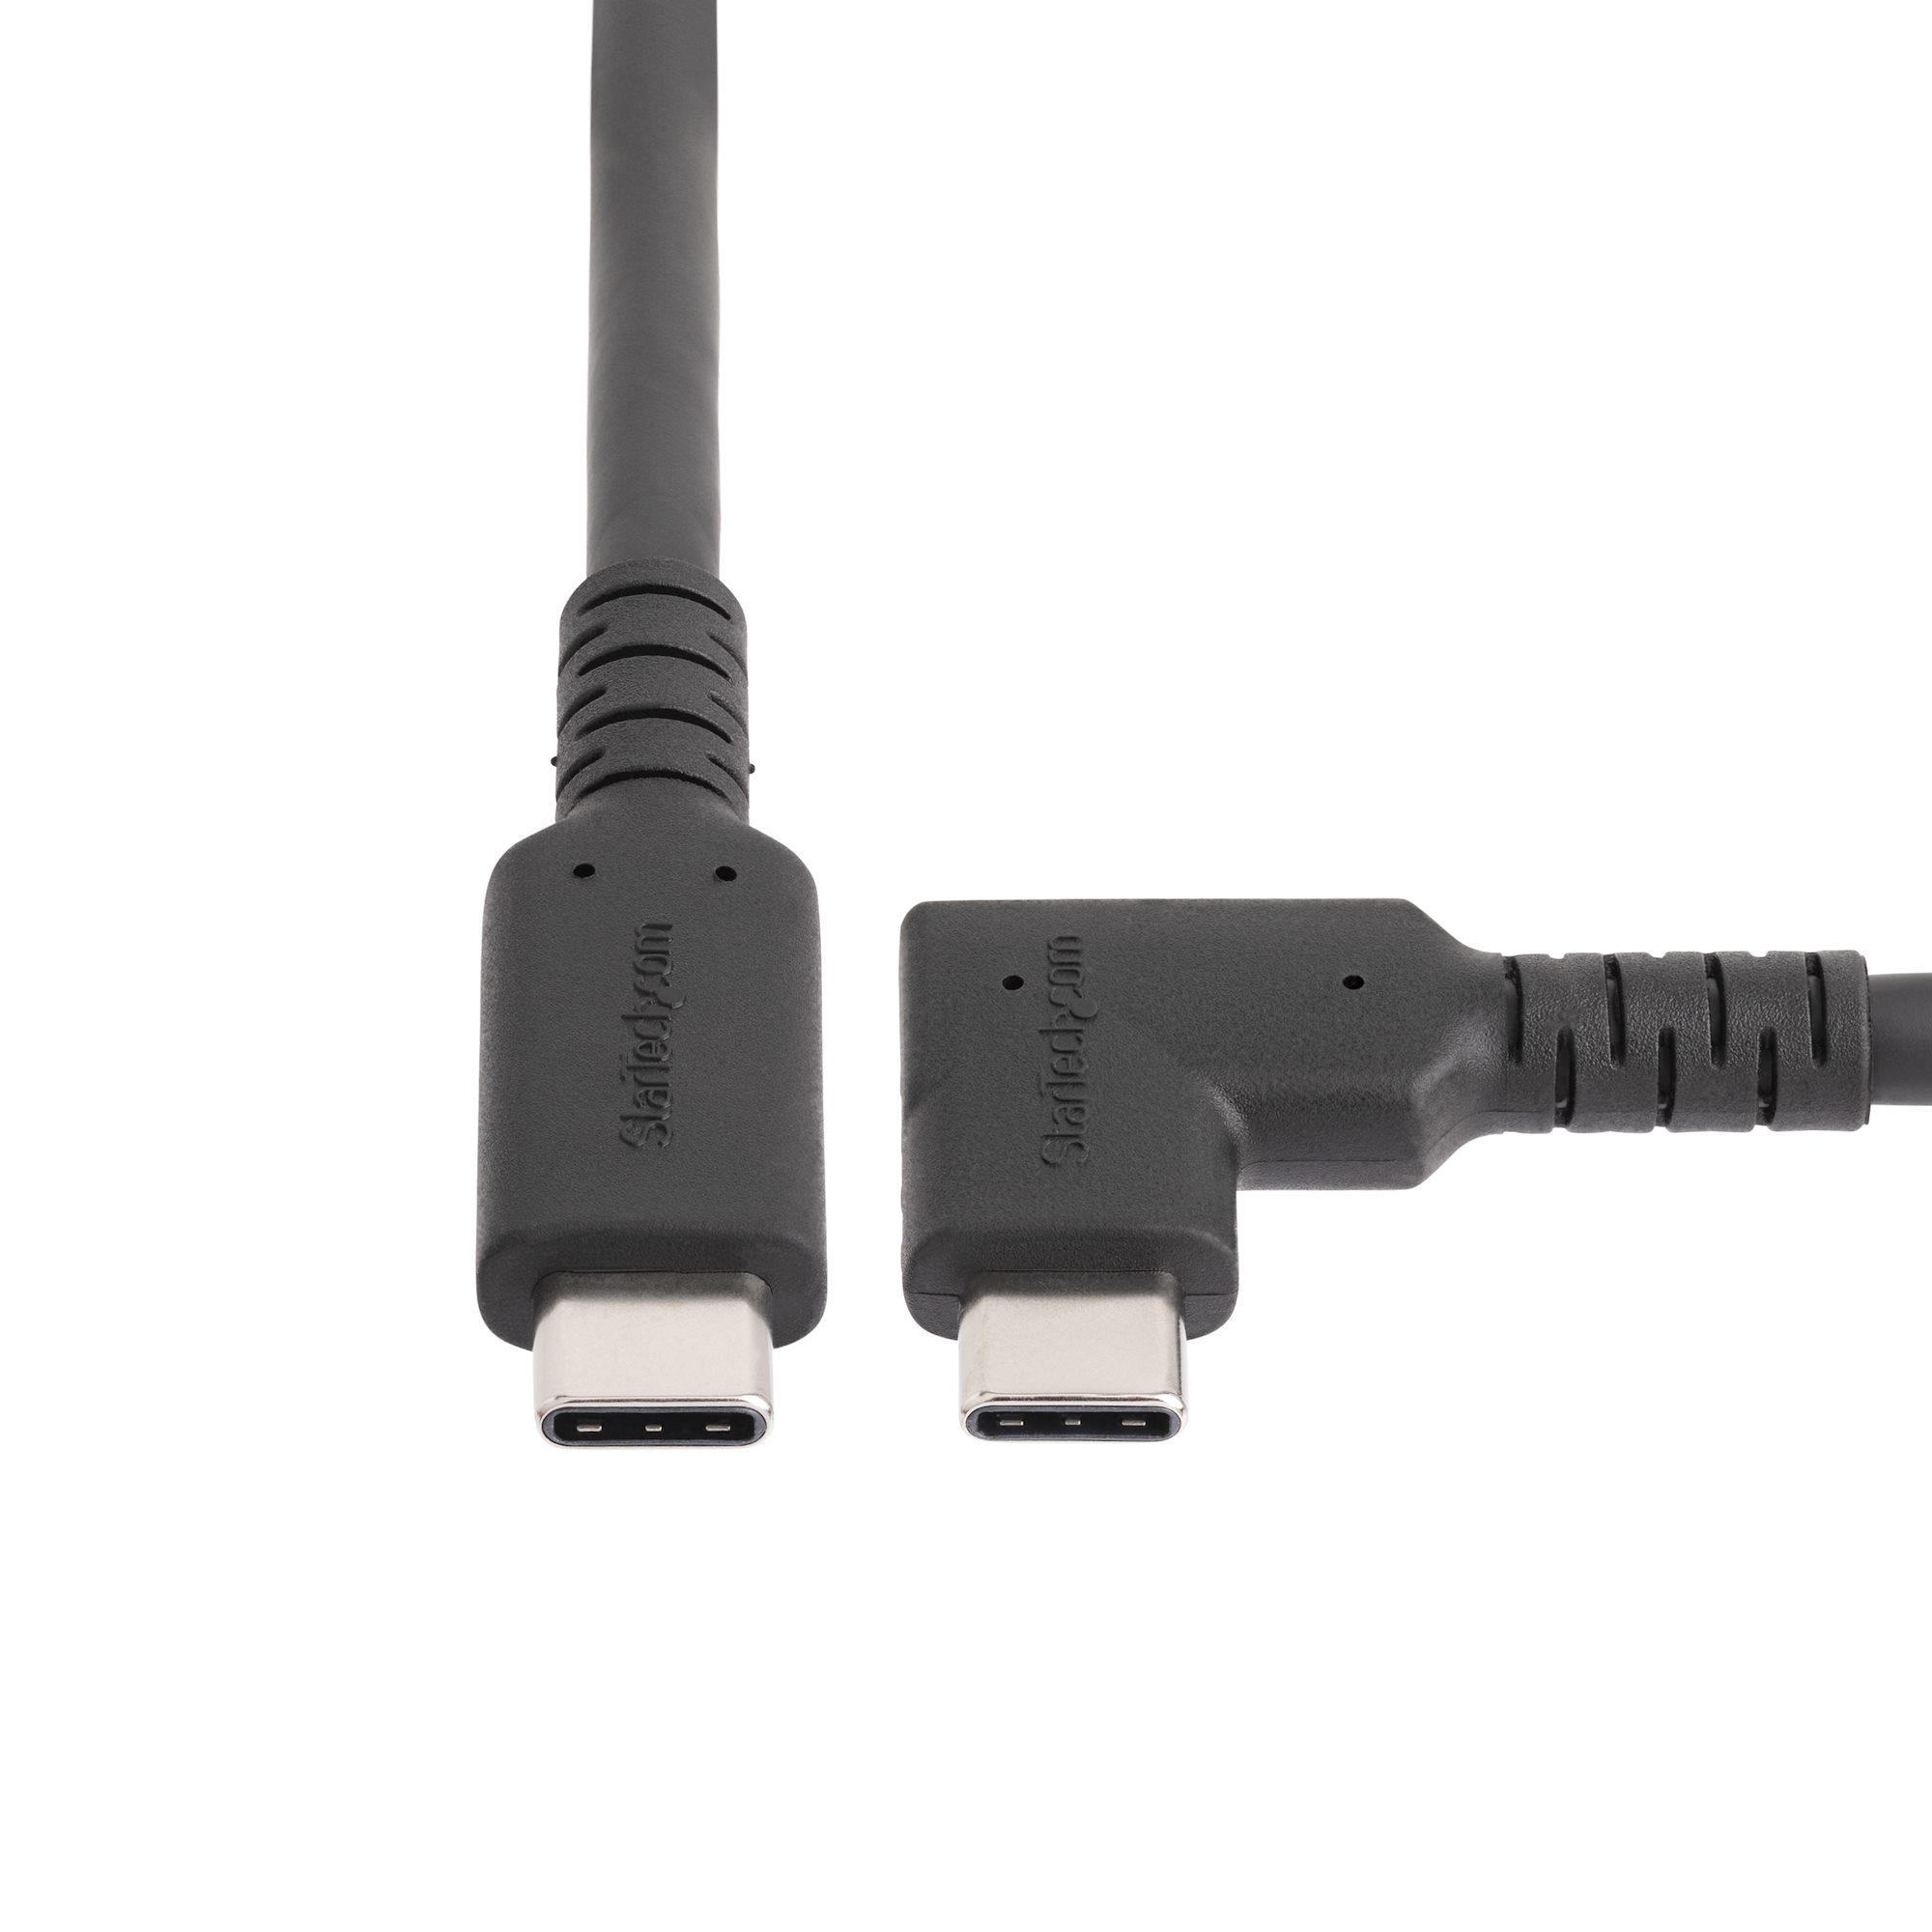 USB-C Cable, USB 3.2, Thunderbolt 3, 100W PD Charging, Right-Angled, 1 m